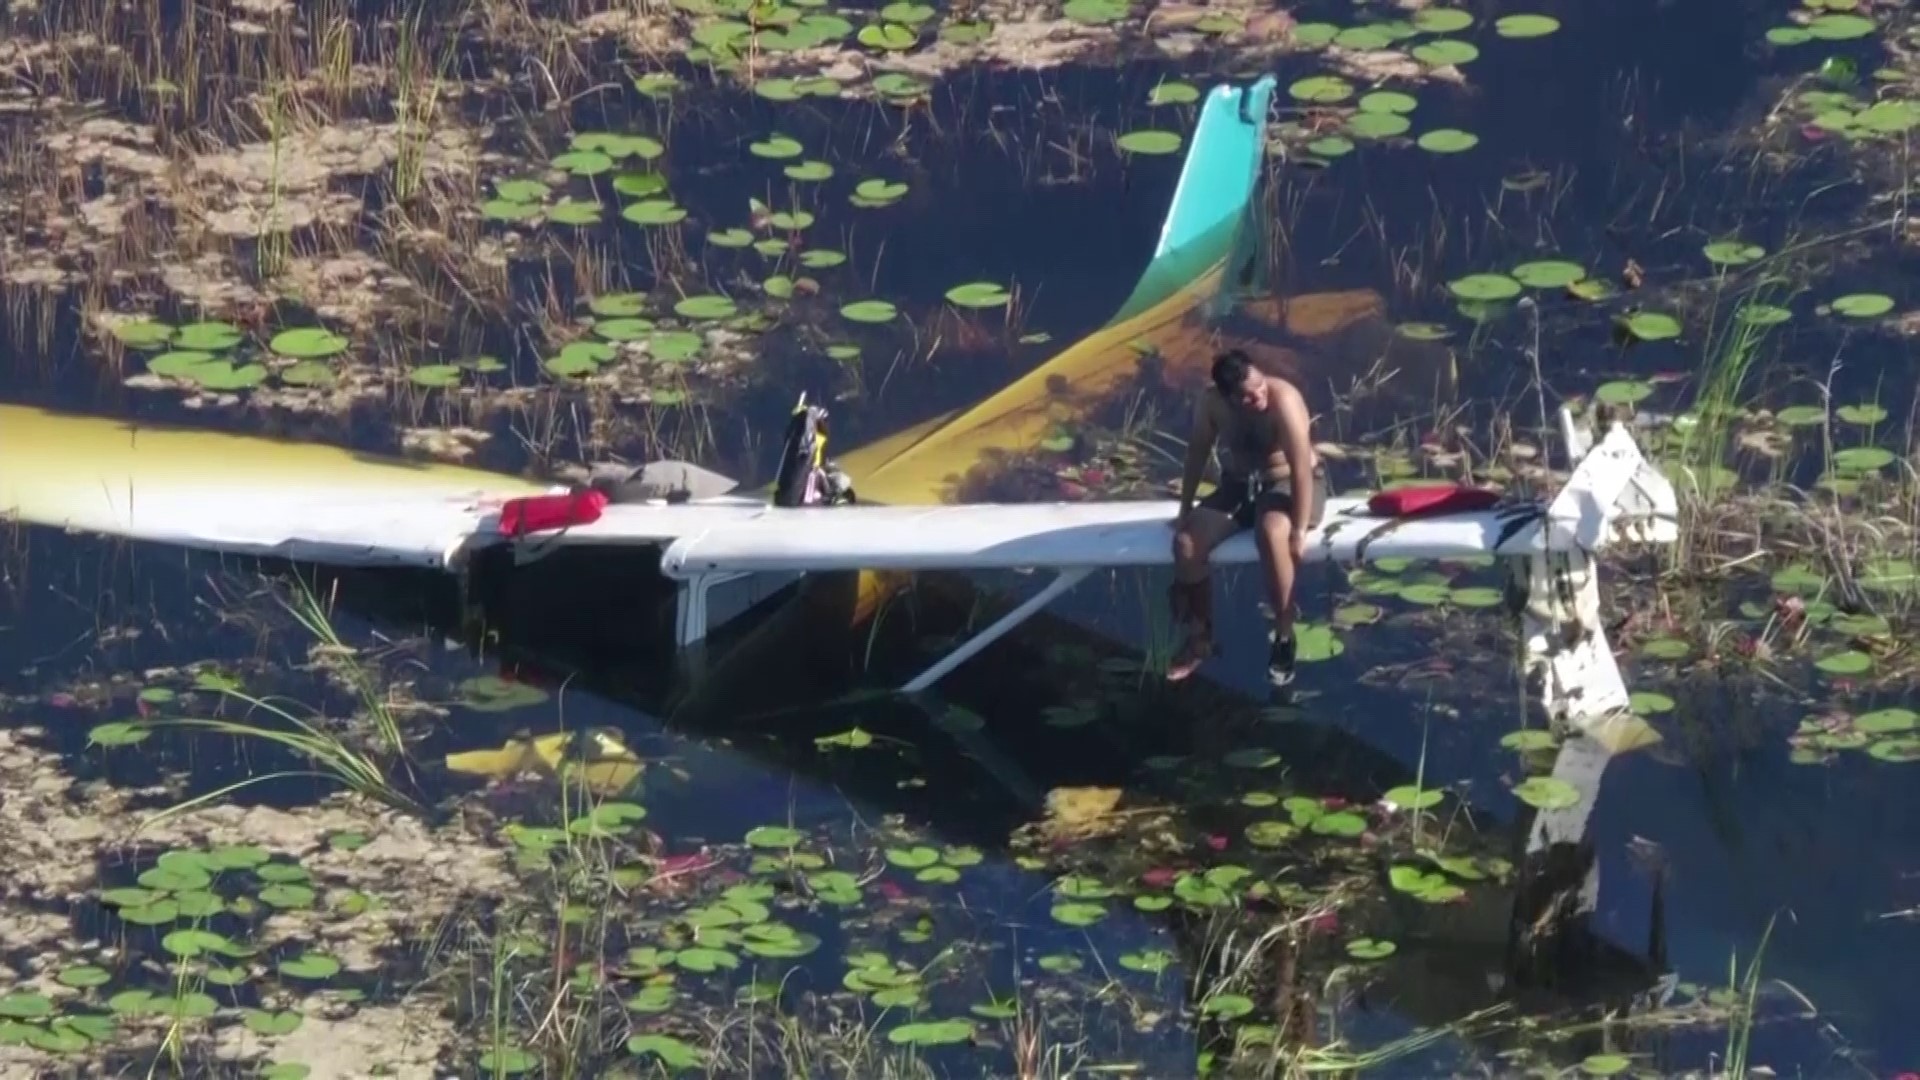 A pilot of a small plane waited 9 hours after his plane crashed in the Florida Everglades before he was rescued, authorities said.